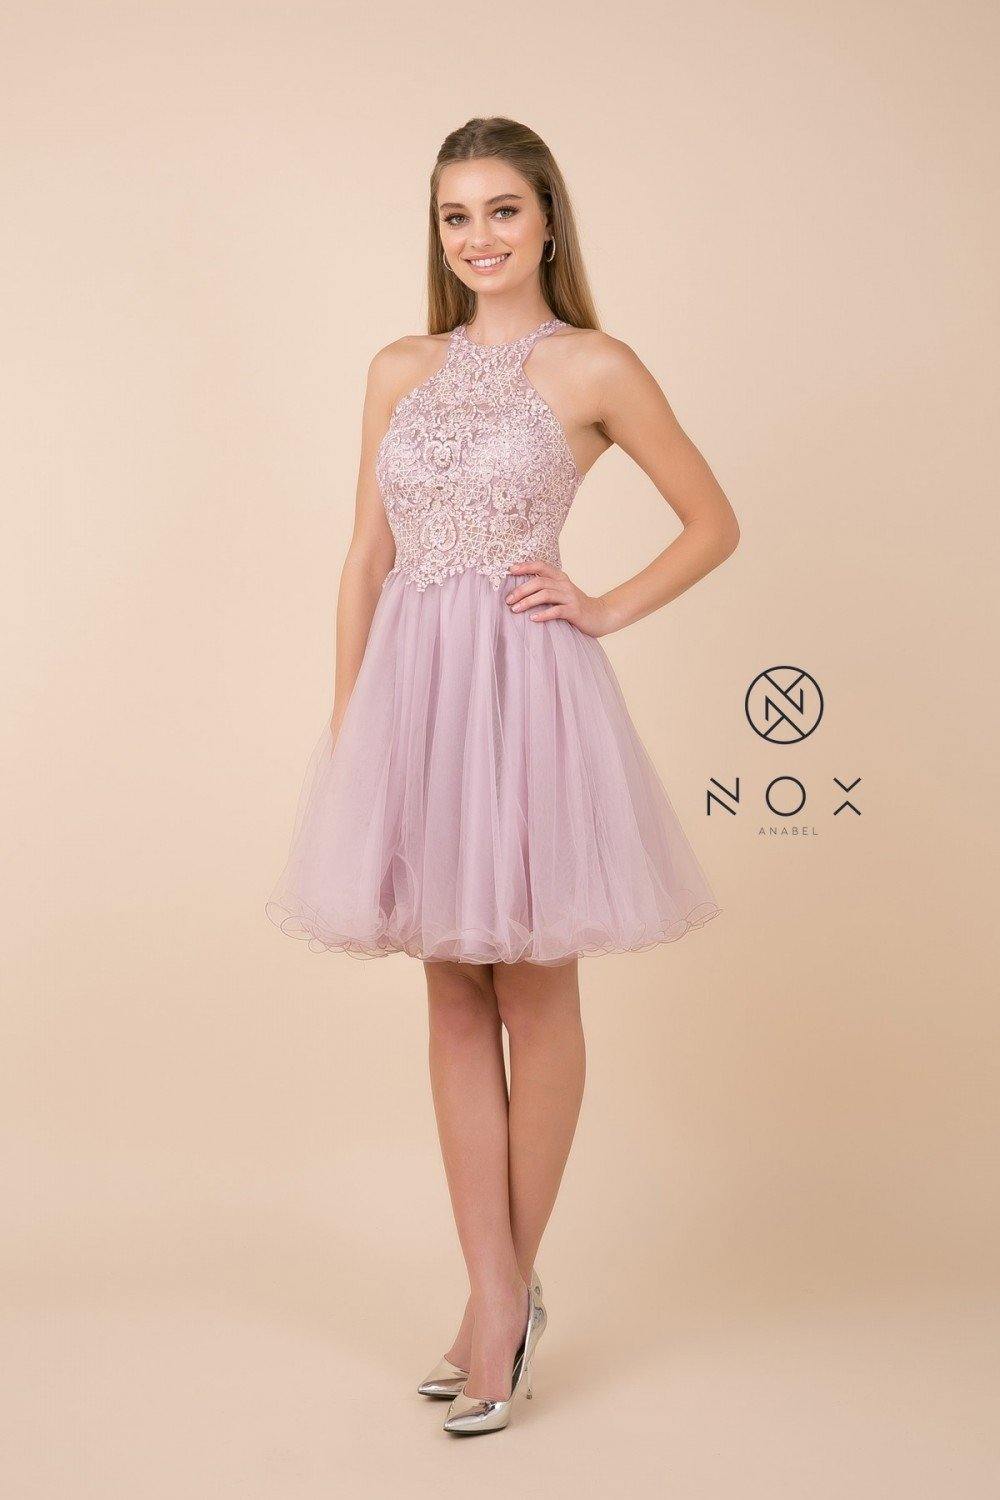 Prom Short Homecoming Dress Sale - The Dress Outlet